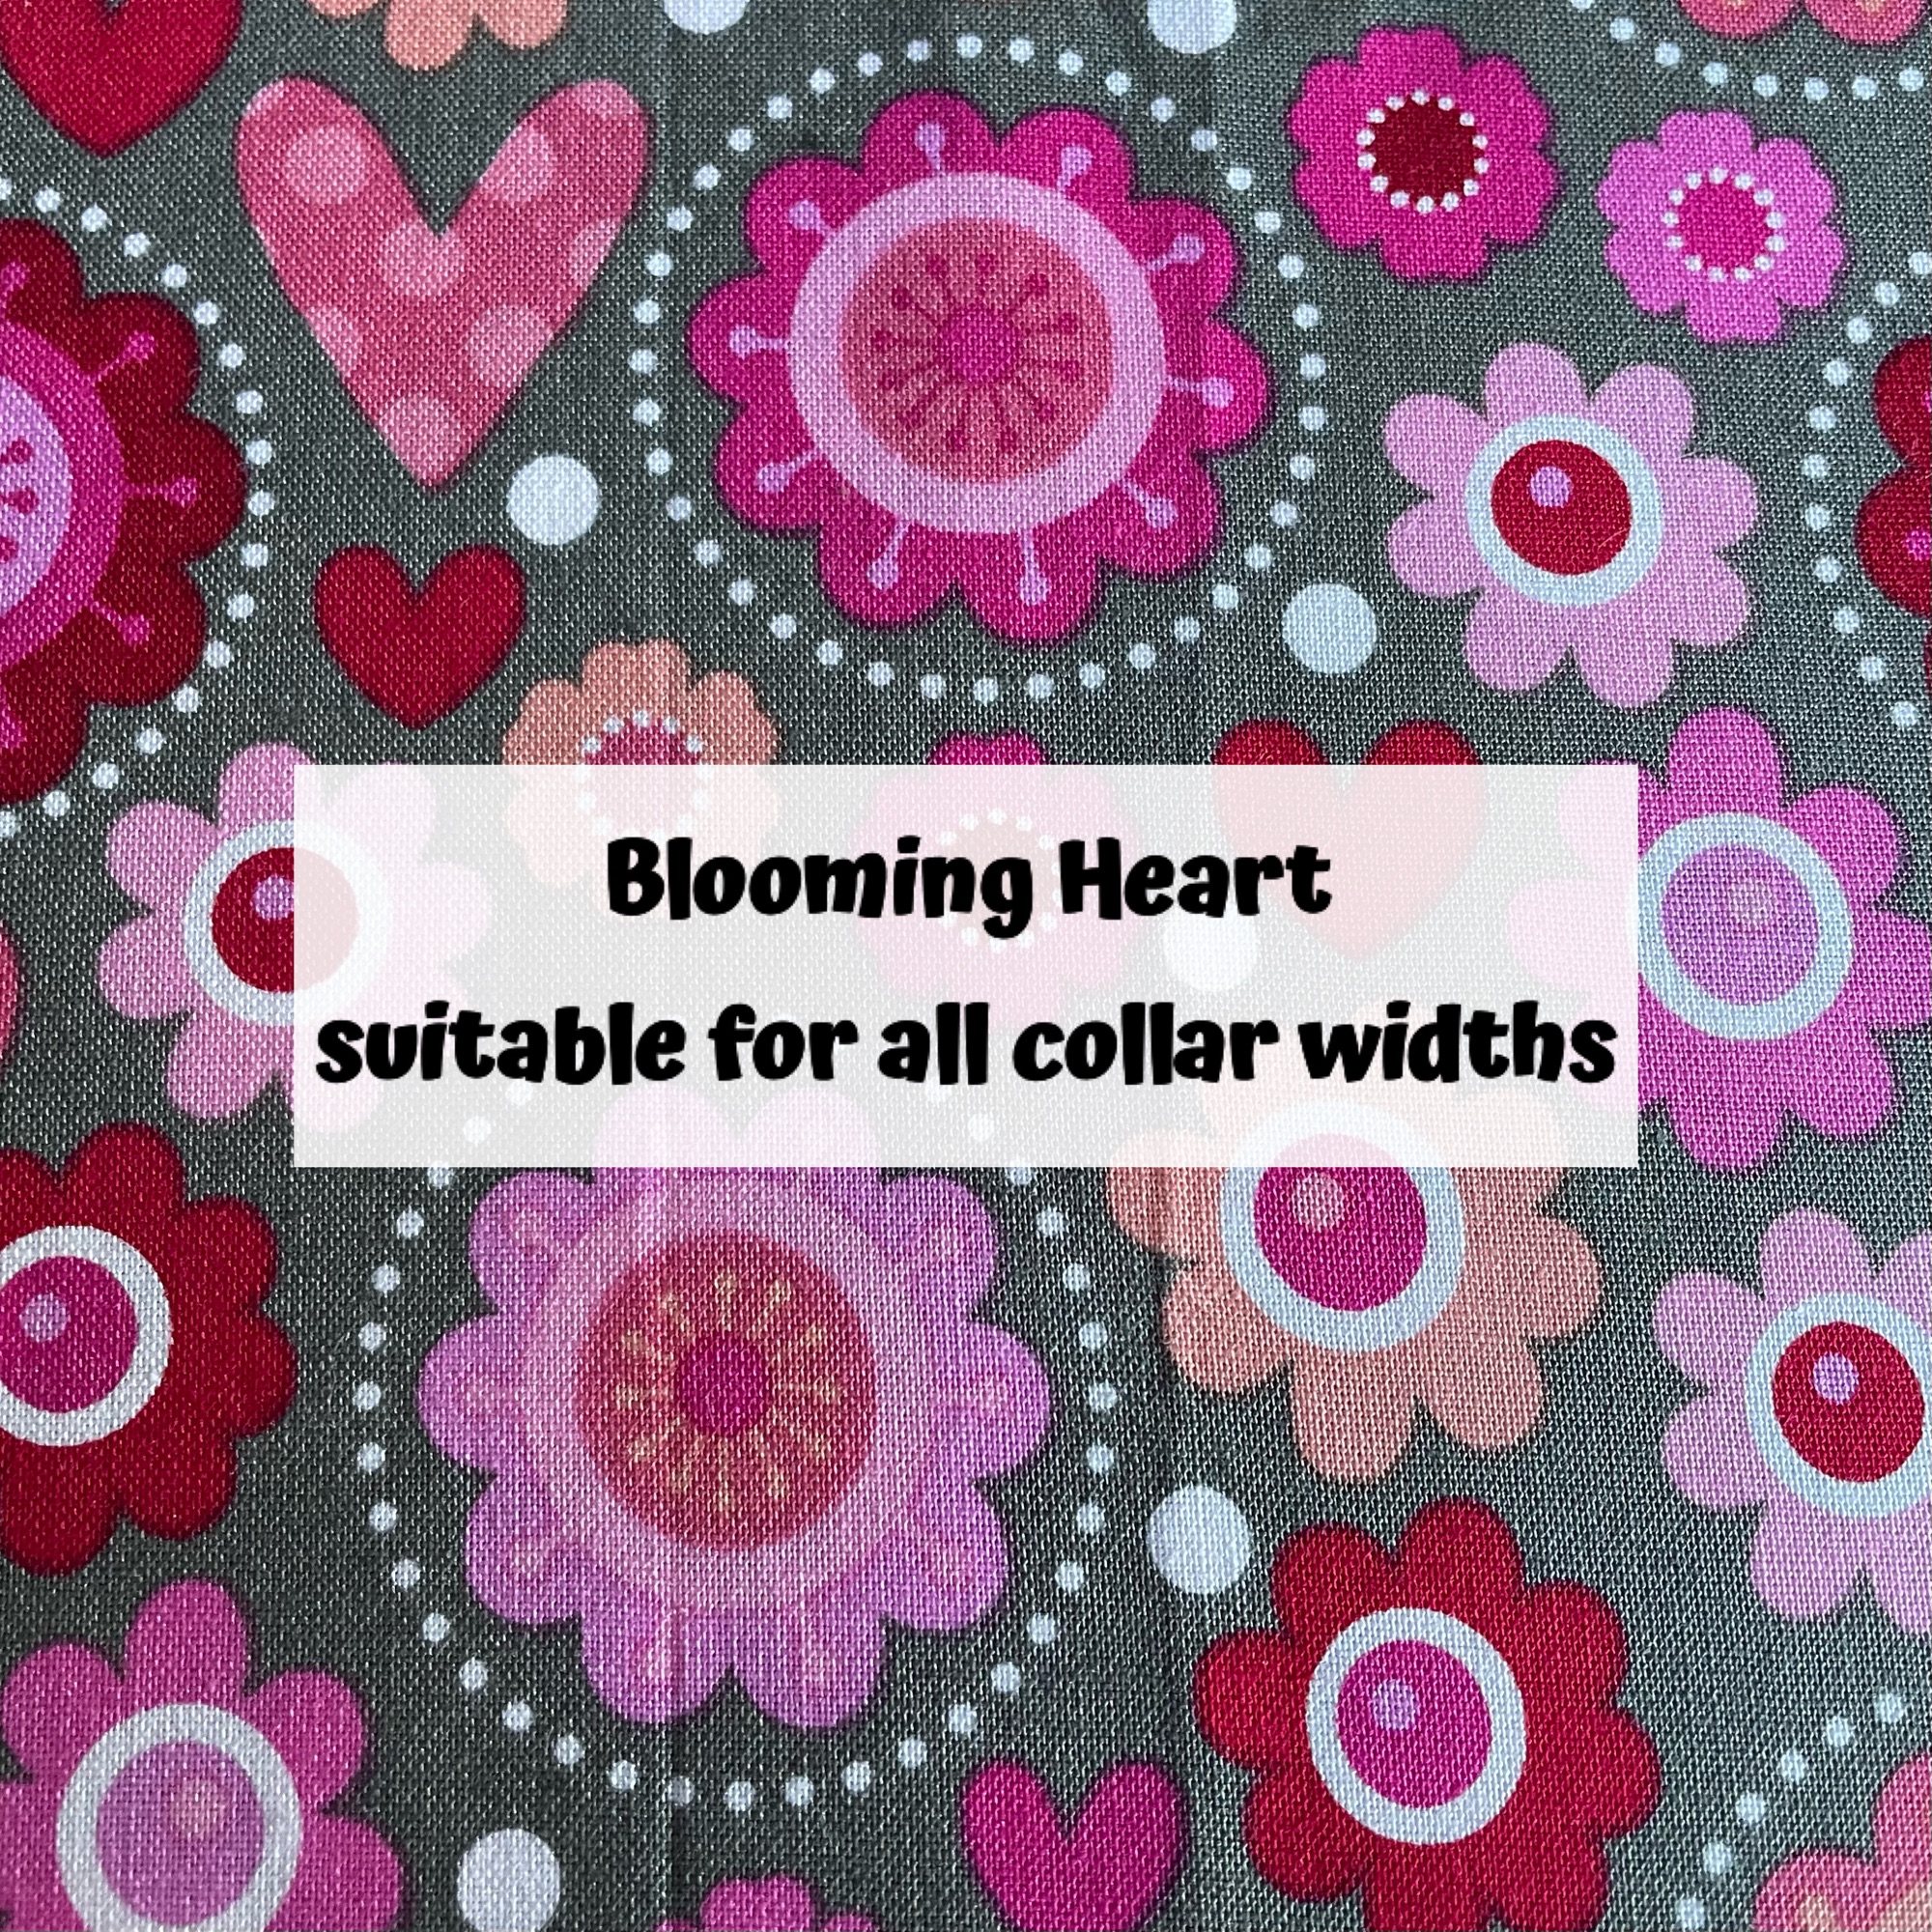 Blooming Heart